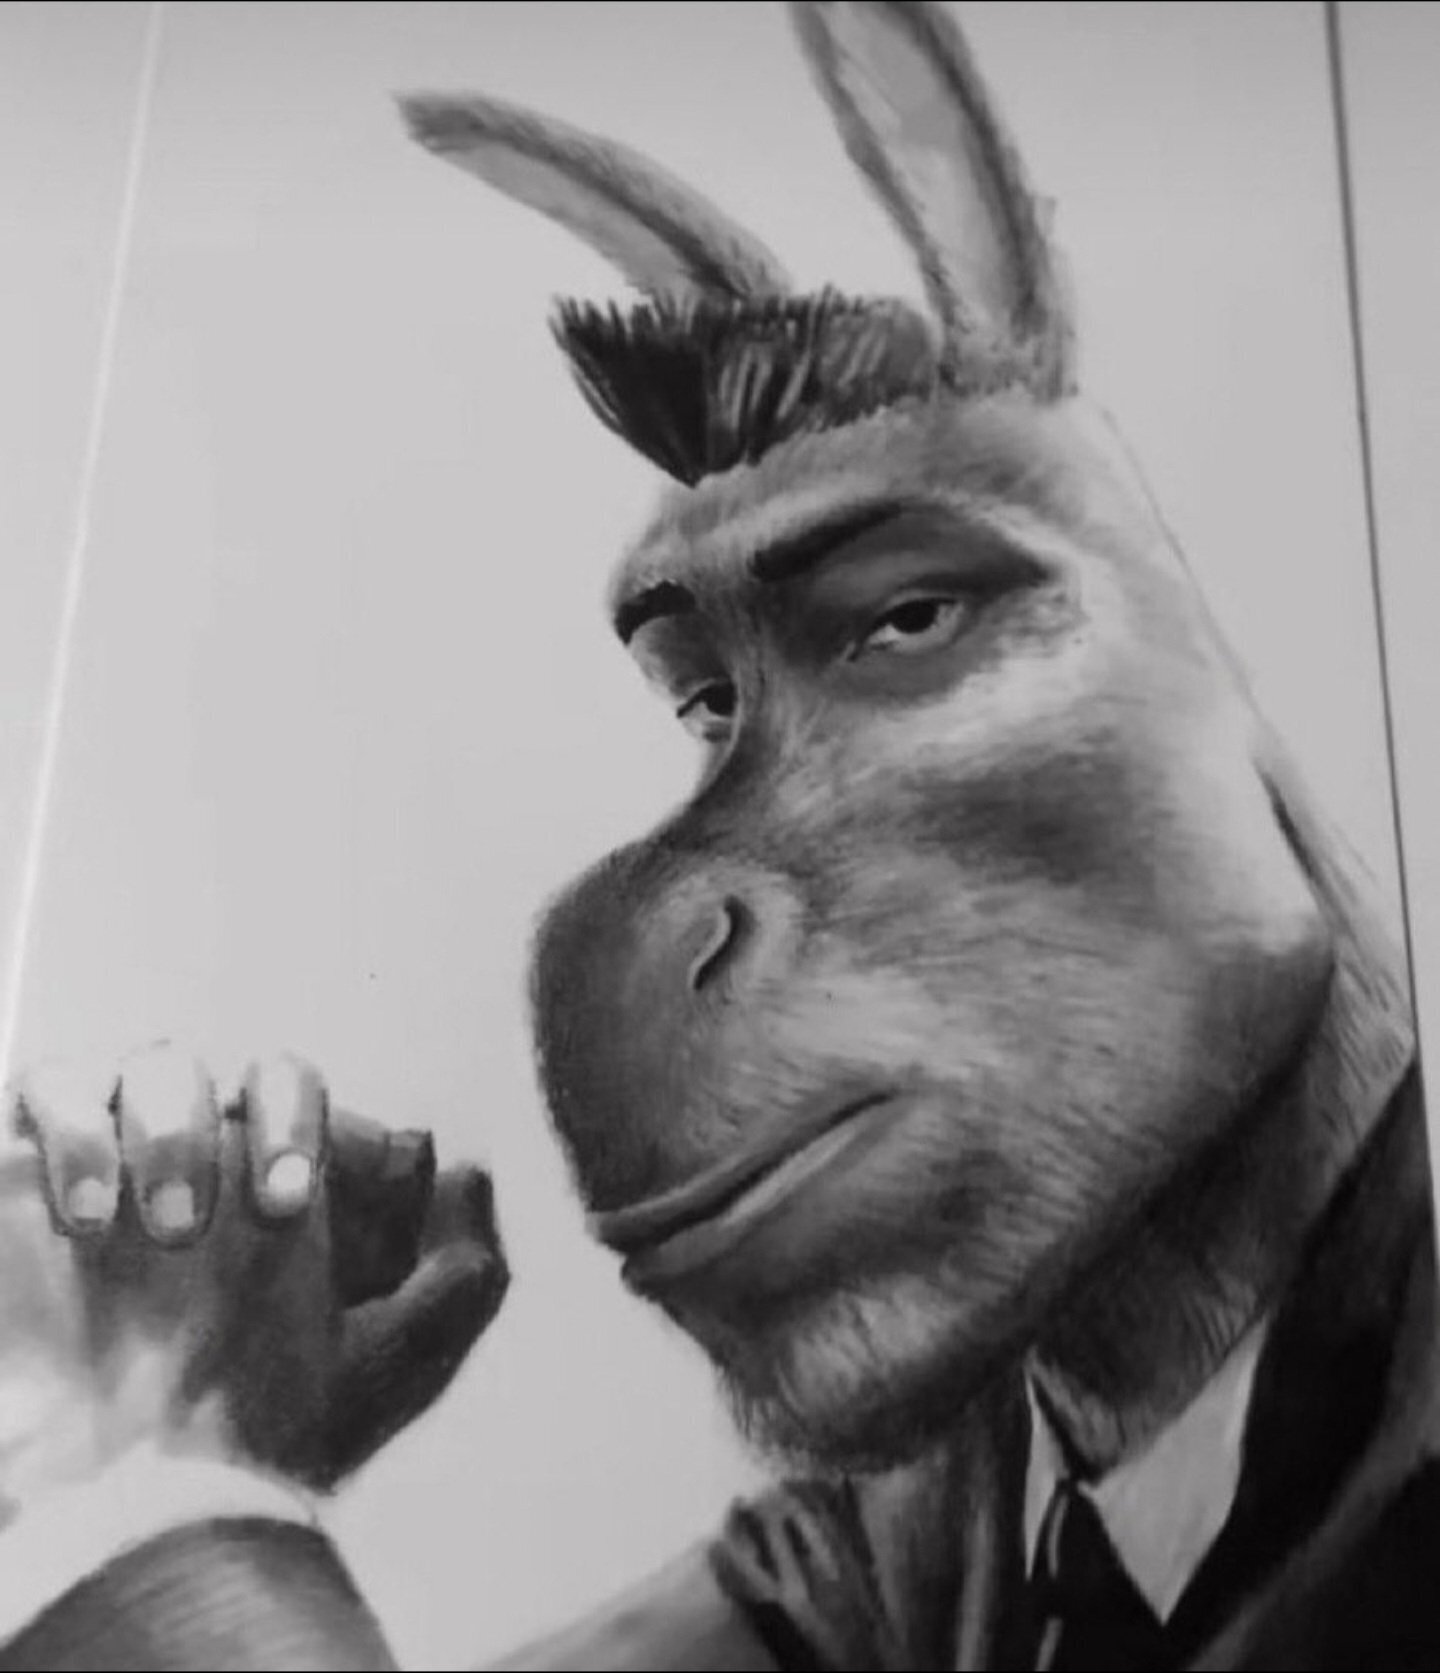 A donkey man dressed up in a classy suit